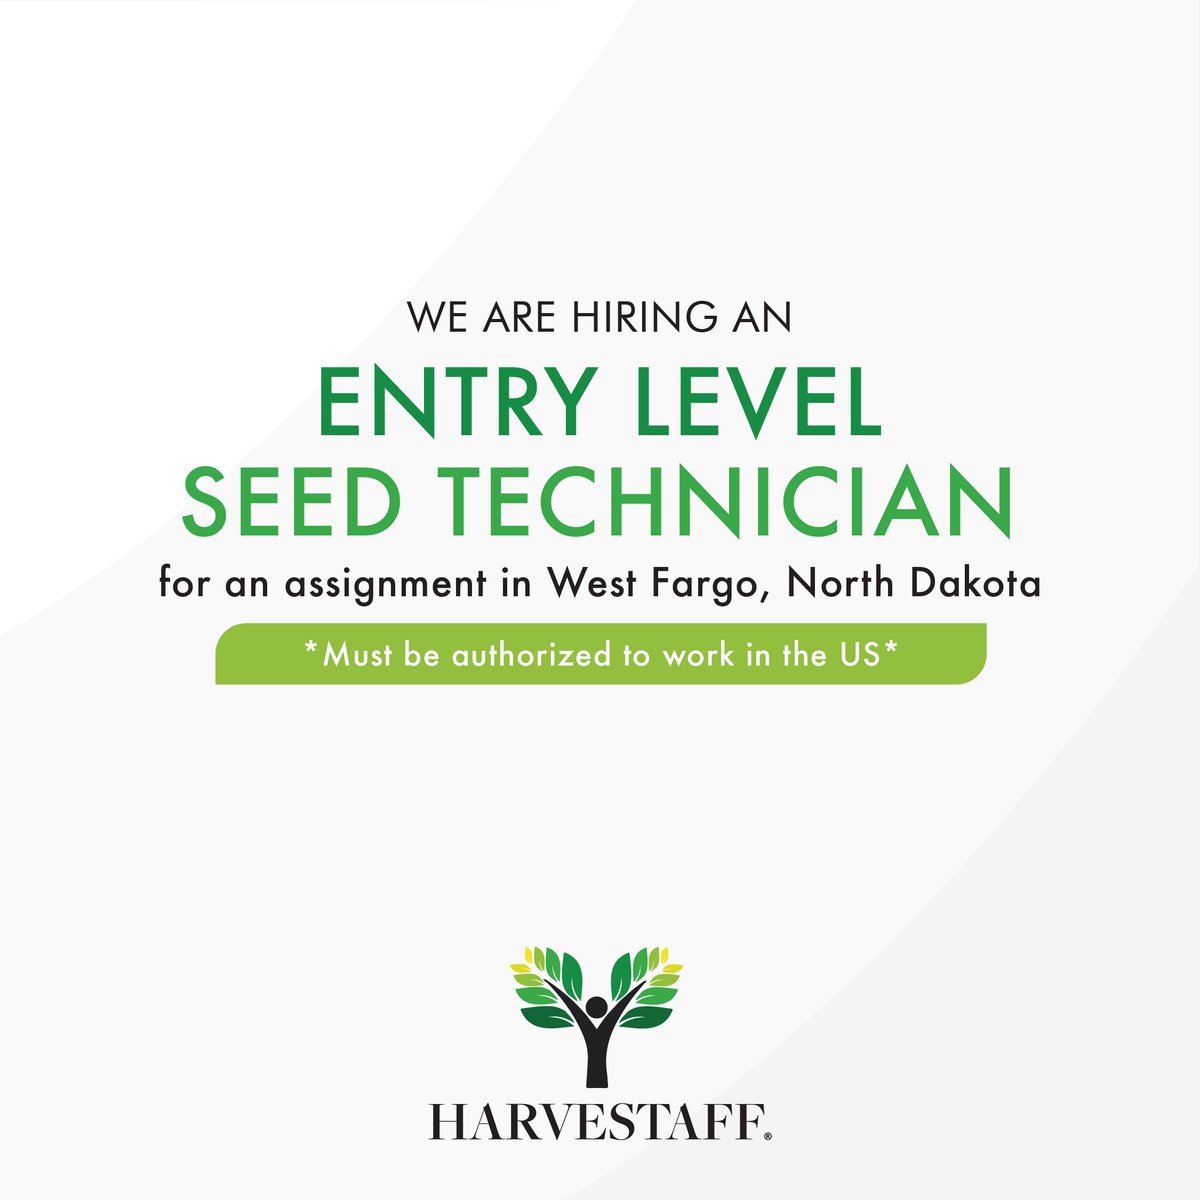 We are hiring an Entry Level Seed Technician for an assignment in West Fargo, North Dakota, to apply and for more information please visit the following link:

job.harvestaff.com/41754_Seed_Tech

#SeedTechnician #NorthDakota #Job #Jobs #HiringNow #JobAlert #Hiring #Vacancy